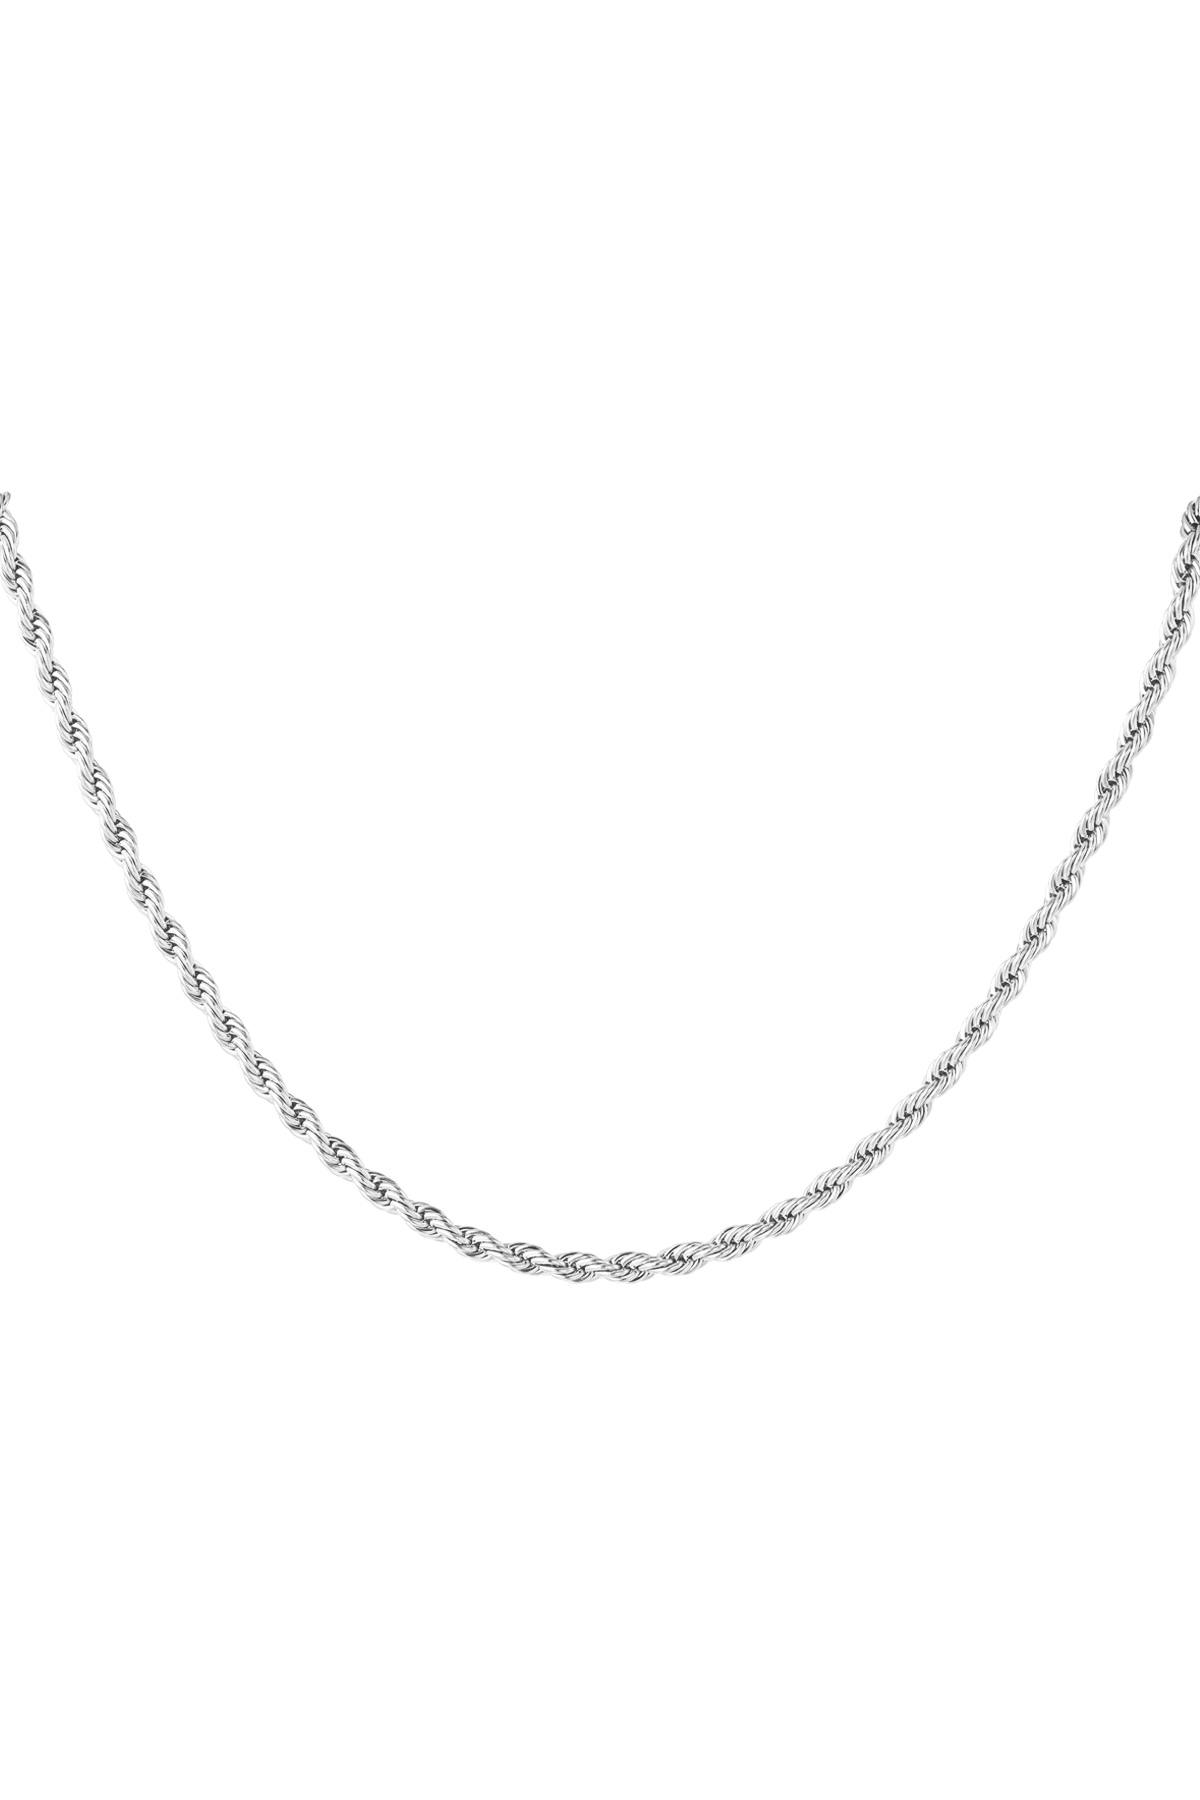 Necklace twisted - silver - 4.0MM